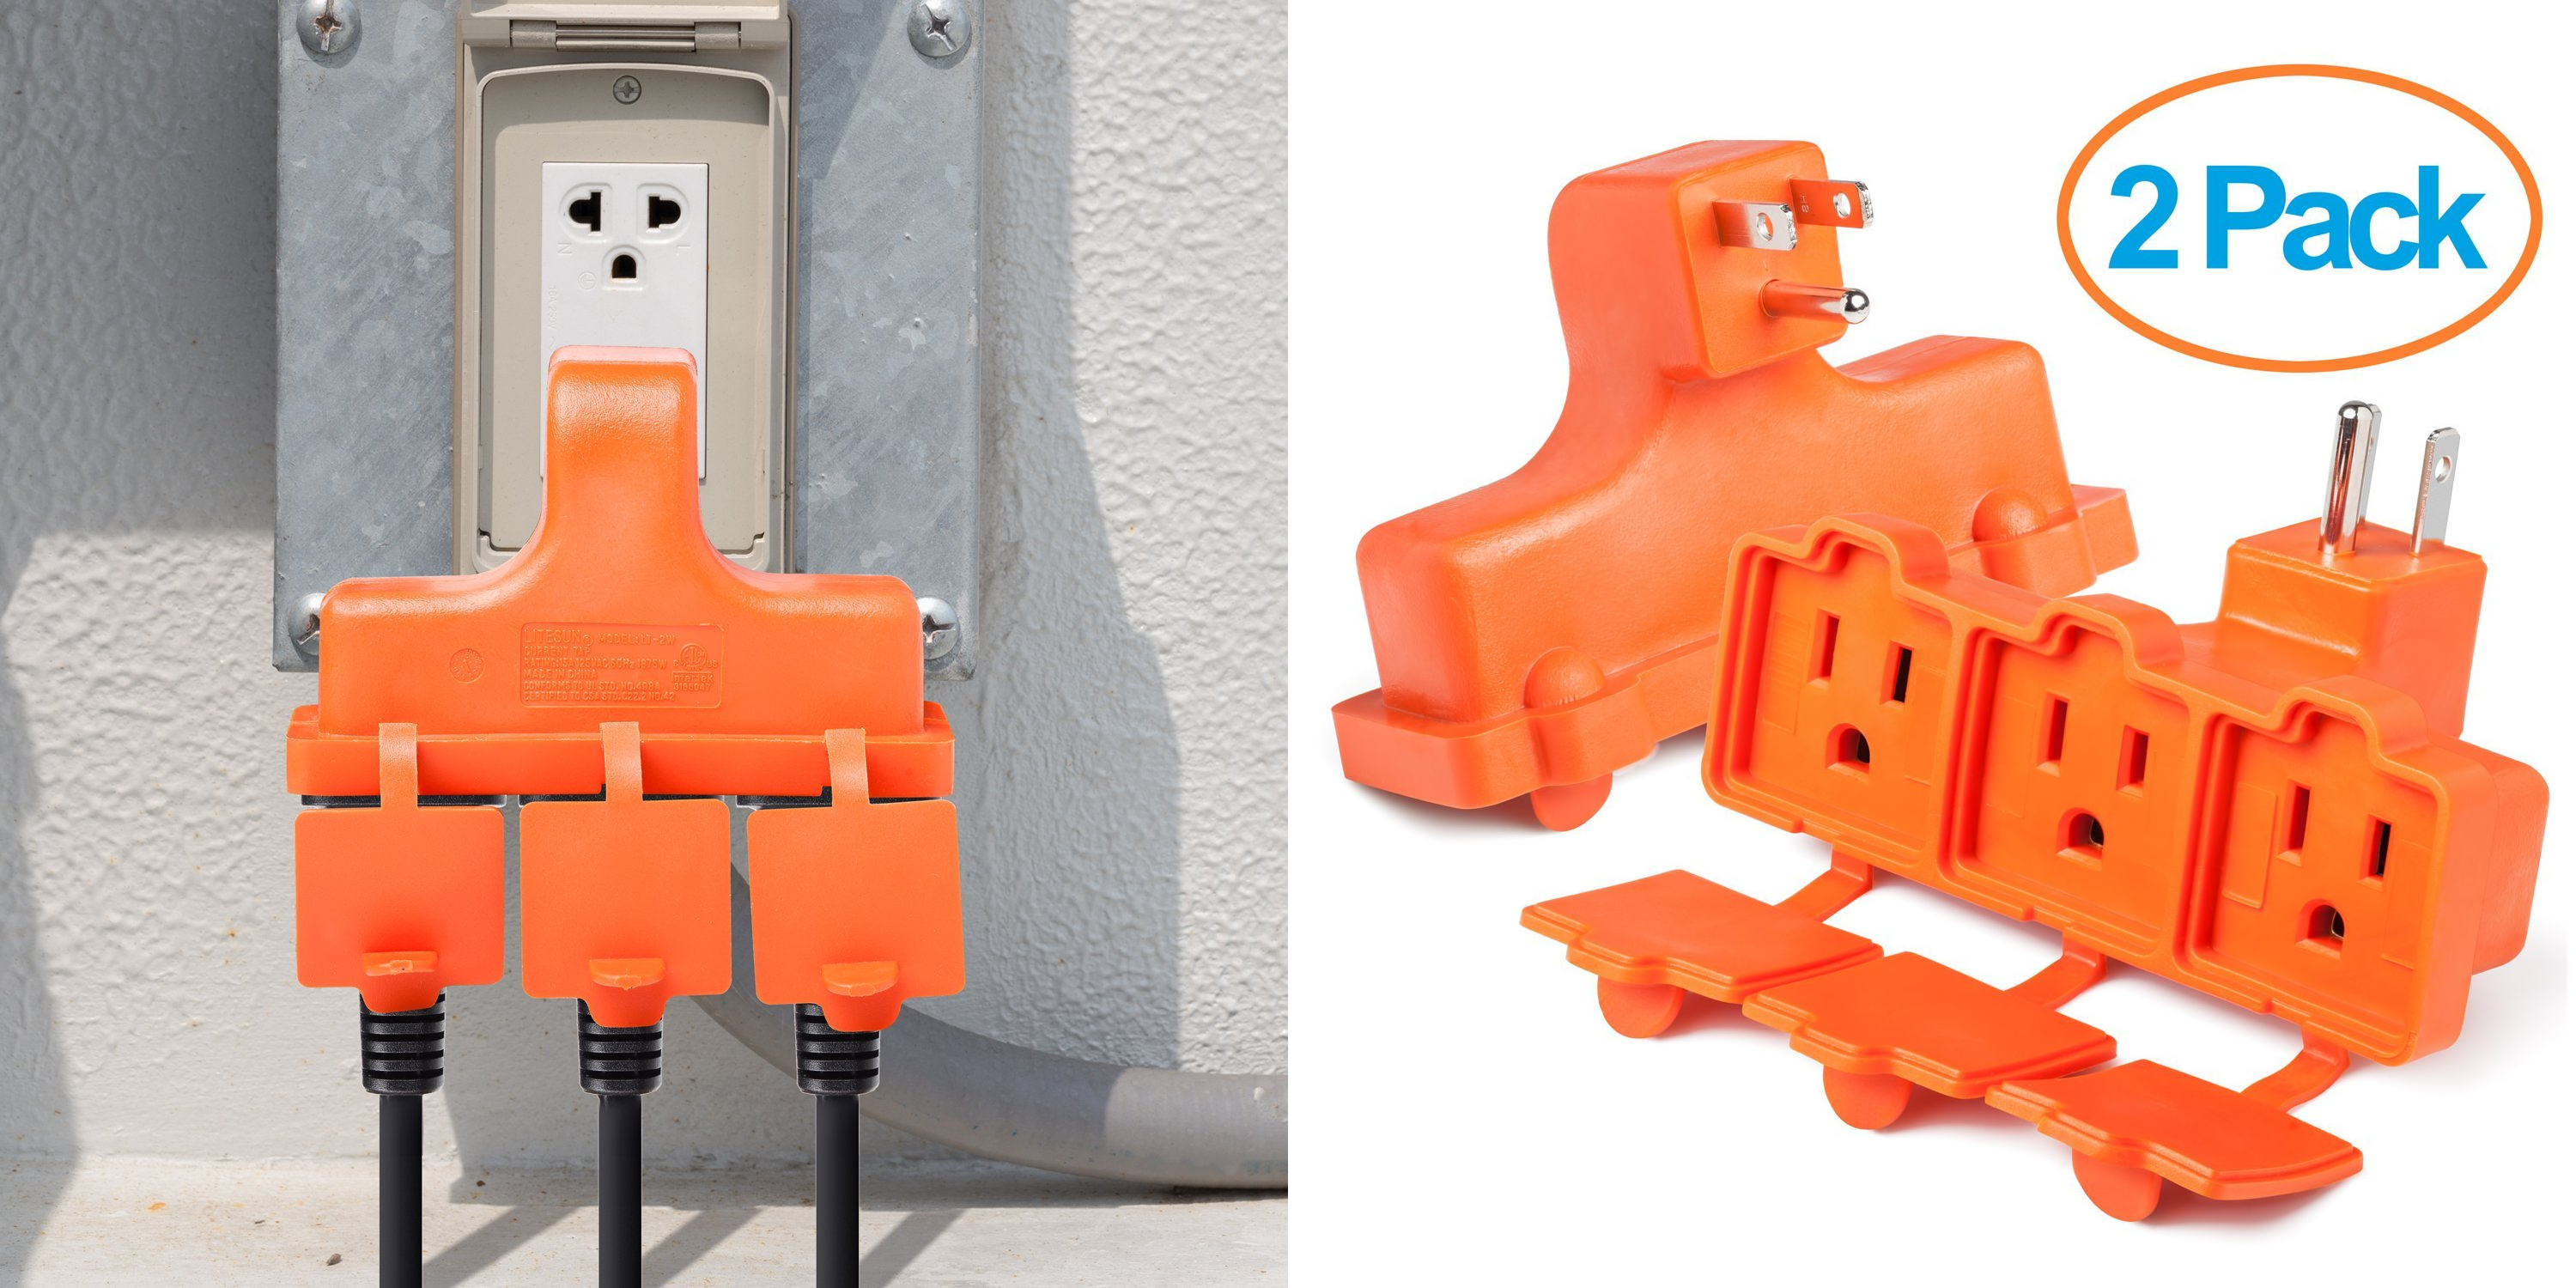 Two Pack of ClearMax 3 Outlet Heavy Duty Indoor Outdoor Power Splitter with Outlet Covers—$4.95!